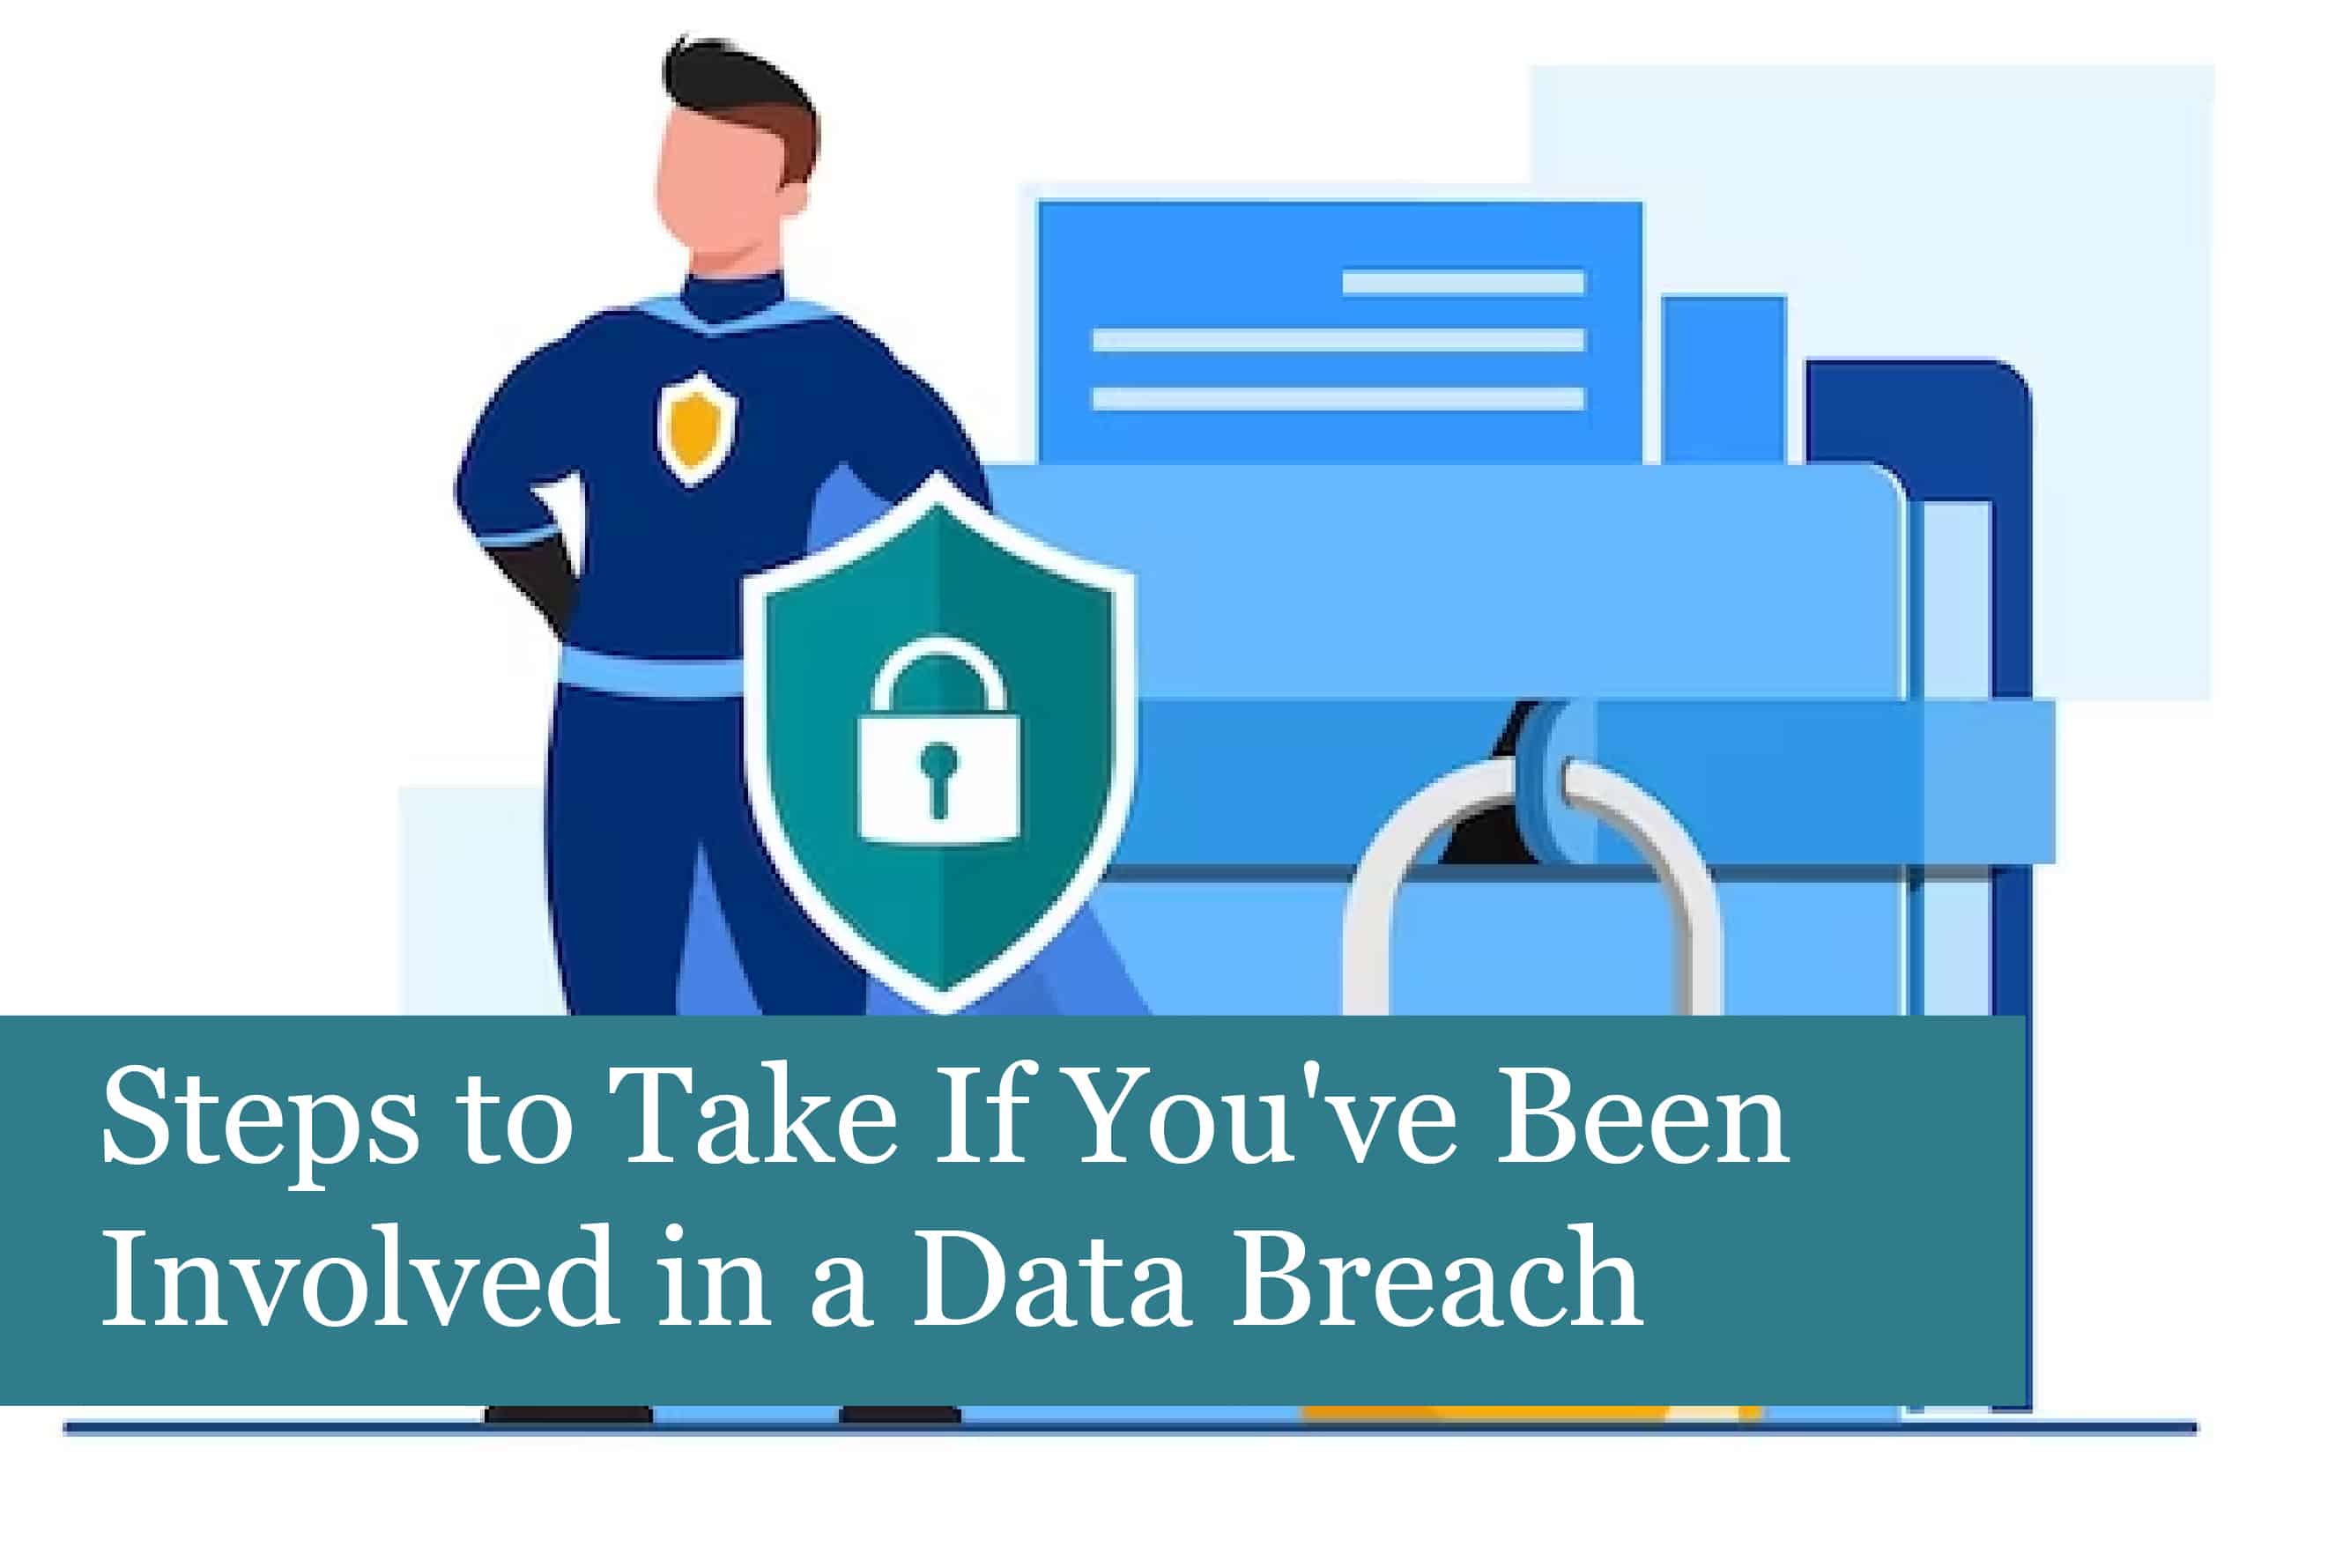 Steps to Take If You Think You've Been Involved in a Data Breach